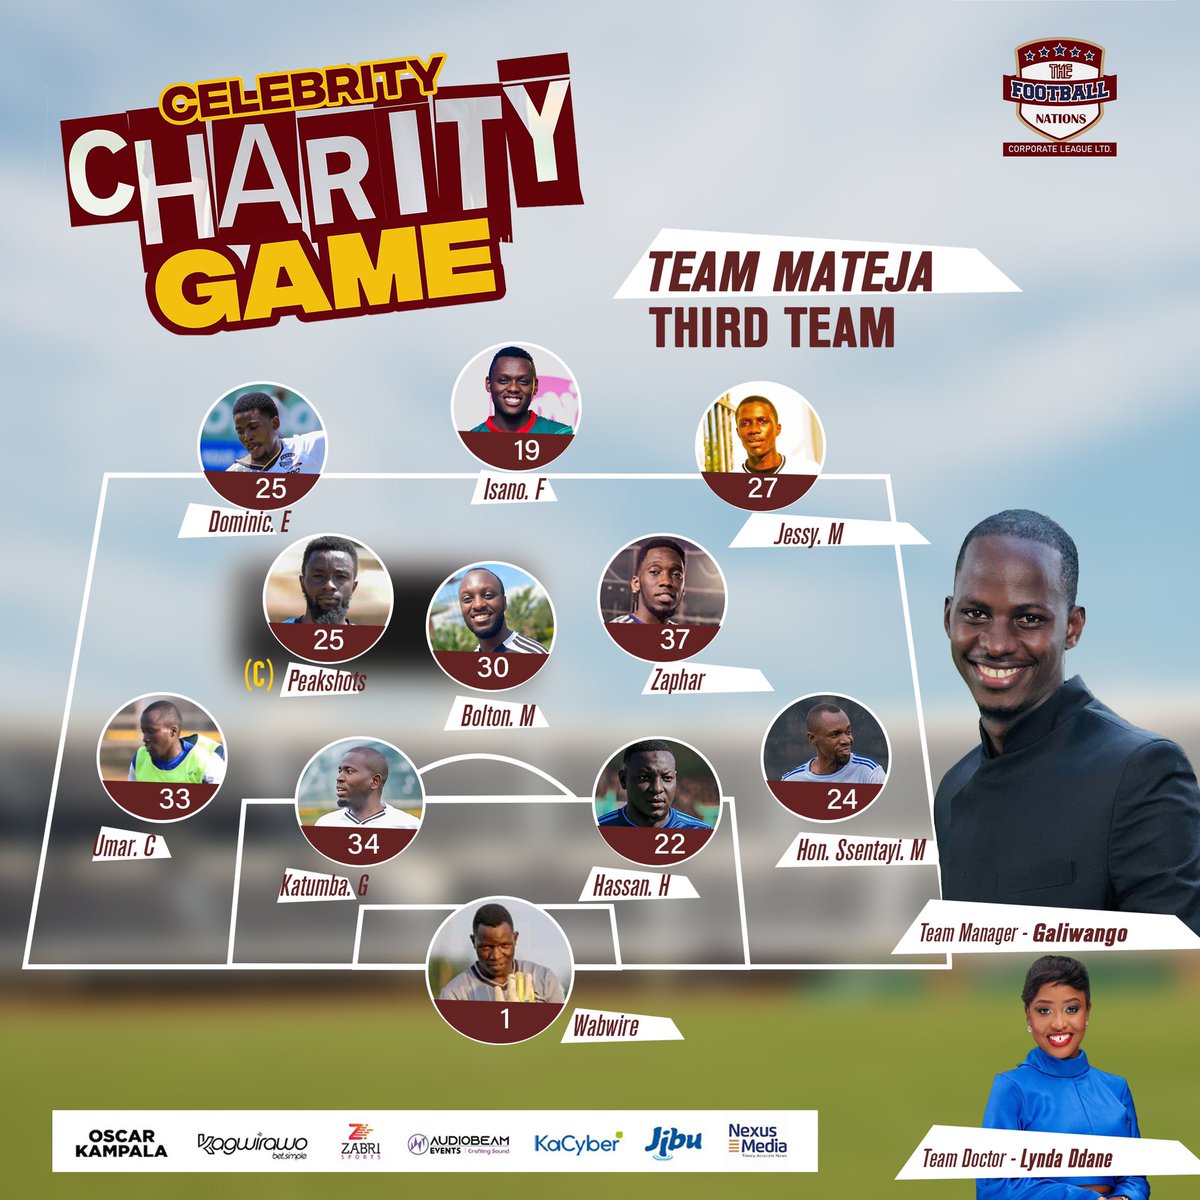 Ladies & Gentlemen ! Our 3rd team to take on @eddykenzoficial ‘s team tomorrow at 2pm. #Football4Charity .